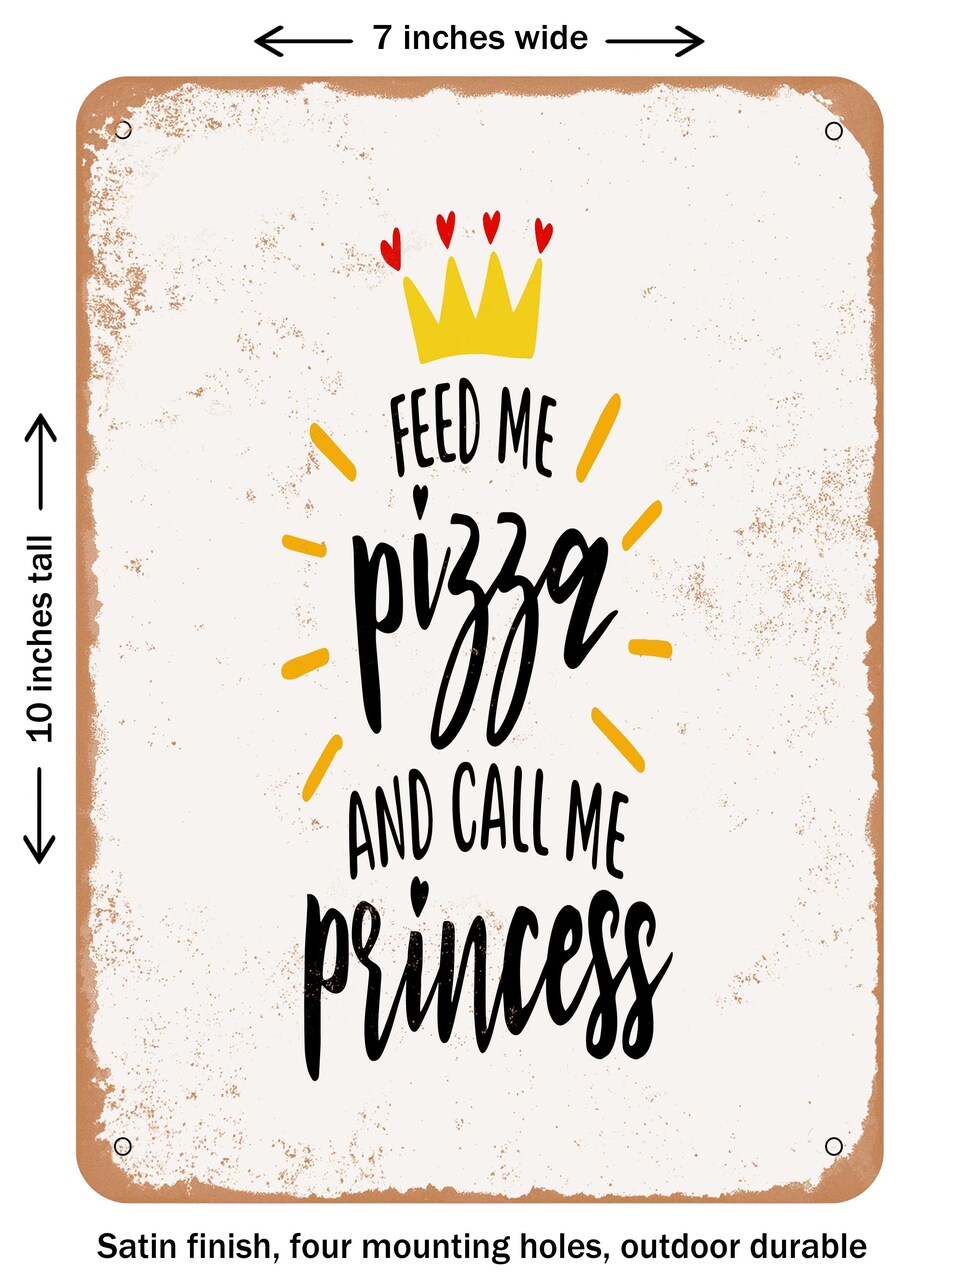 DECORATIVE METAL SIGN - Feed Me Pizza and Call Me Princess  - Vintage Rusty Look